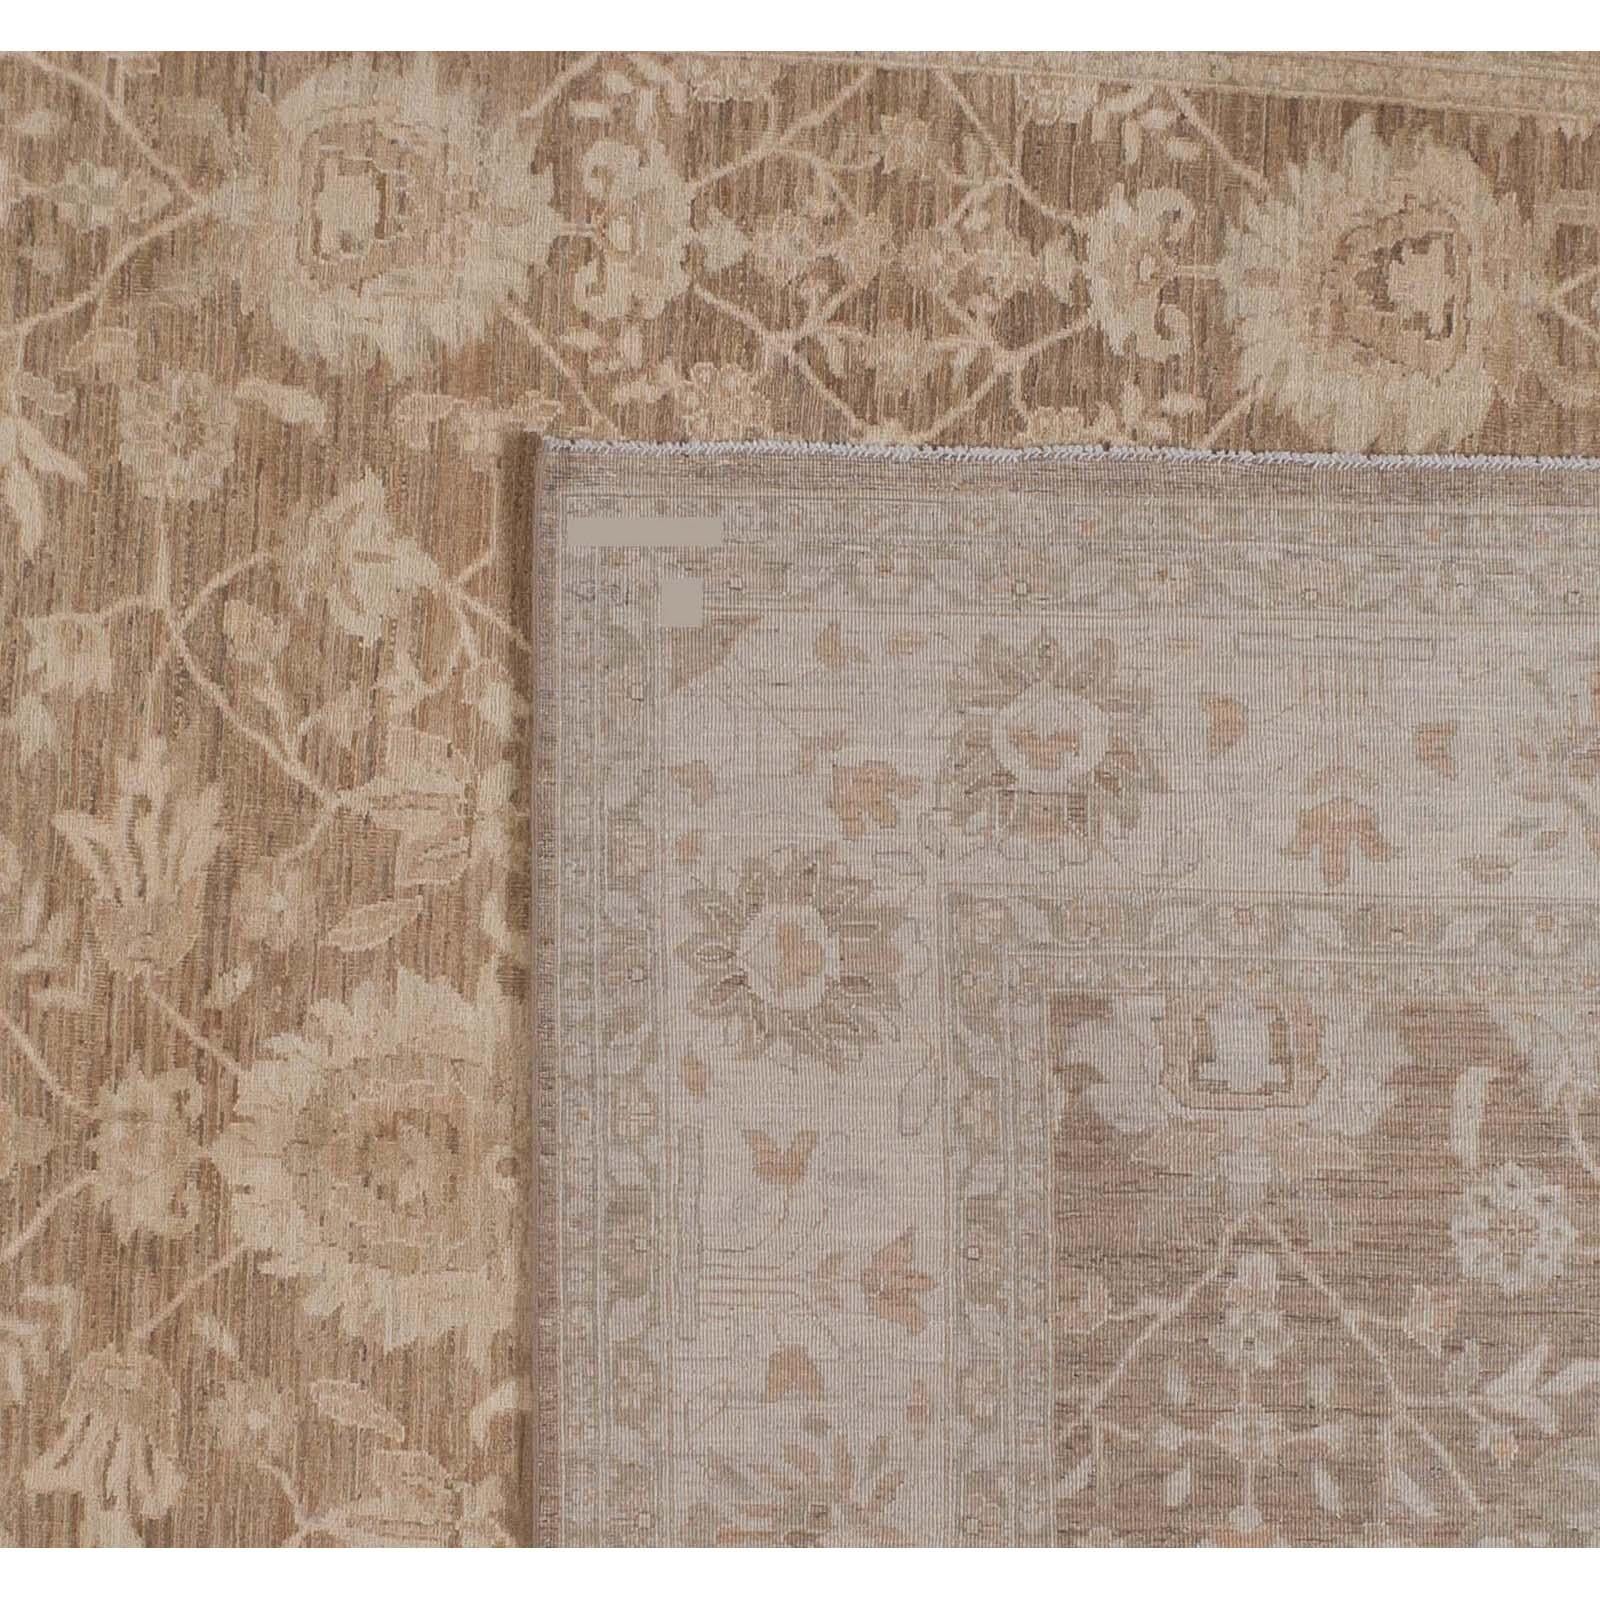 An excellent example of a traditional Pakistani design executed in a range of warm brown and beige tones that will bring warmth and energy to any space. The darker centre panel features floral medallions in pleasing symmetrical pattern. The